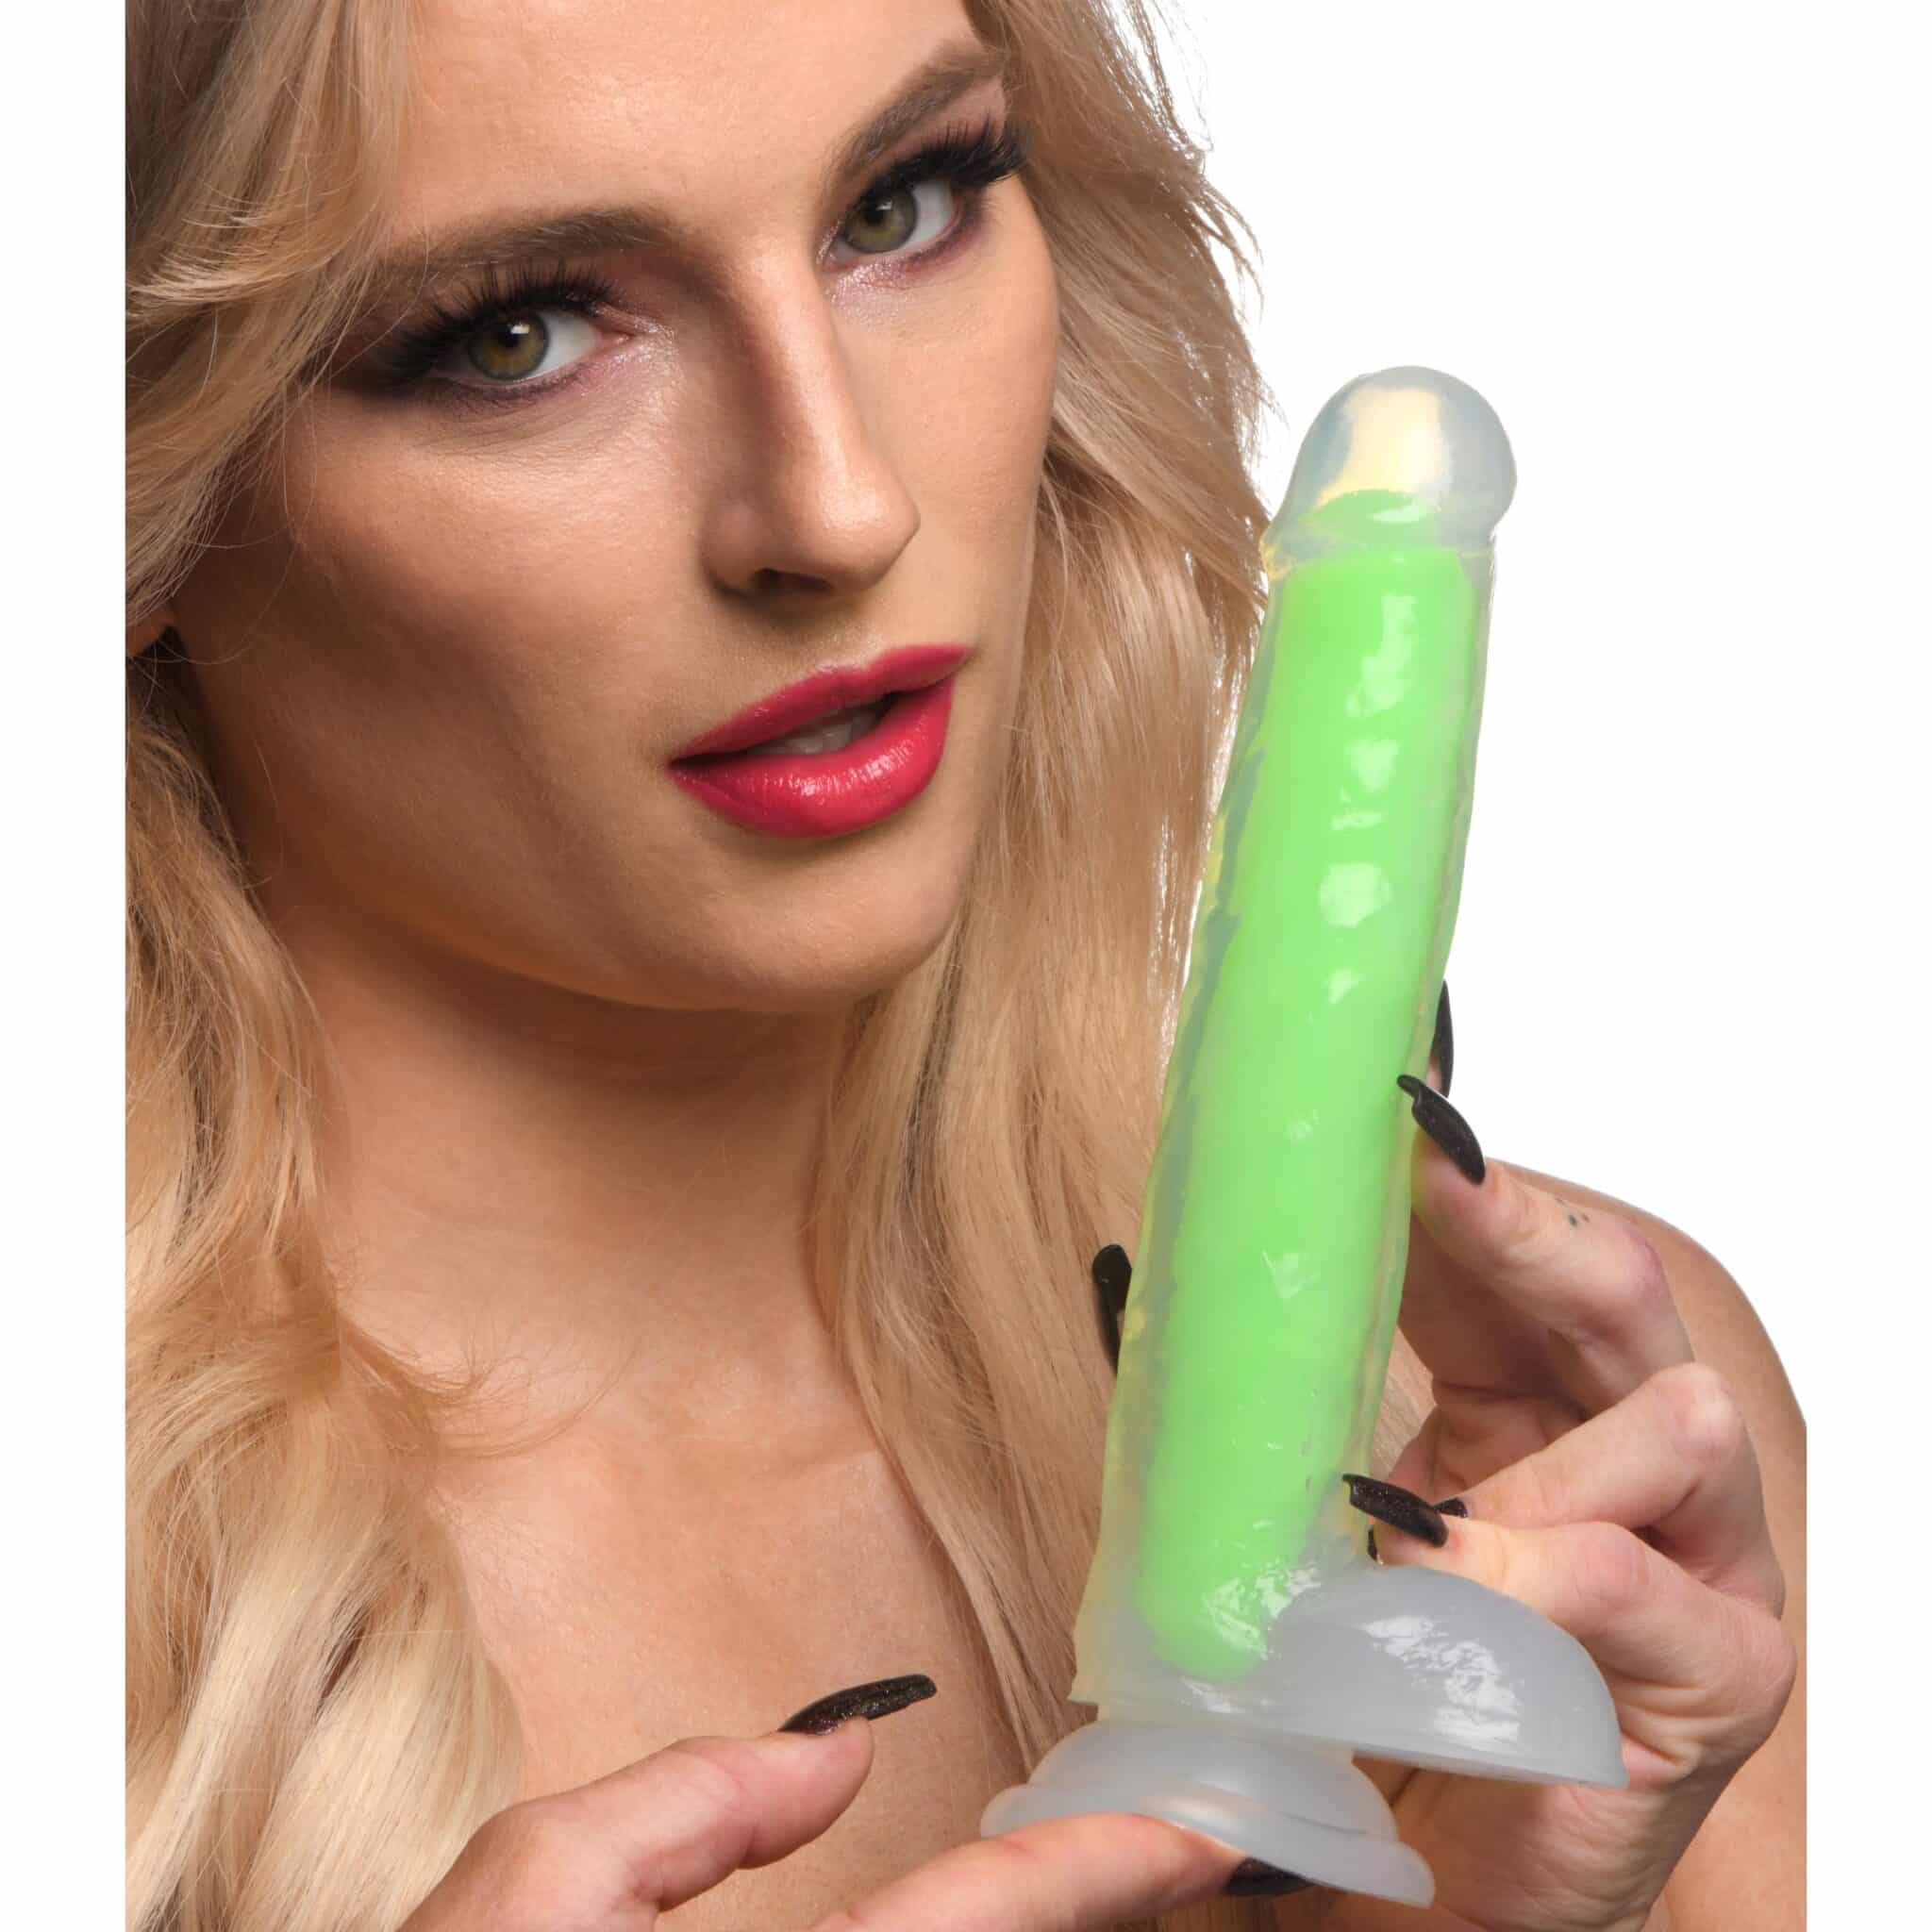 7 Inch Glow-in-the-Dark Silicone Dildo with Balls - Green-3